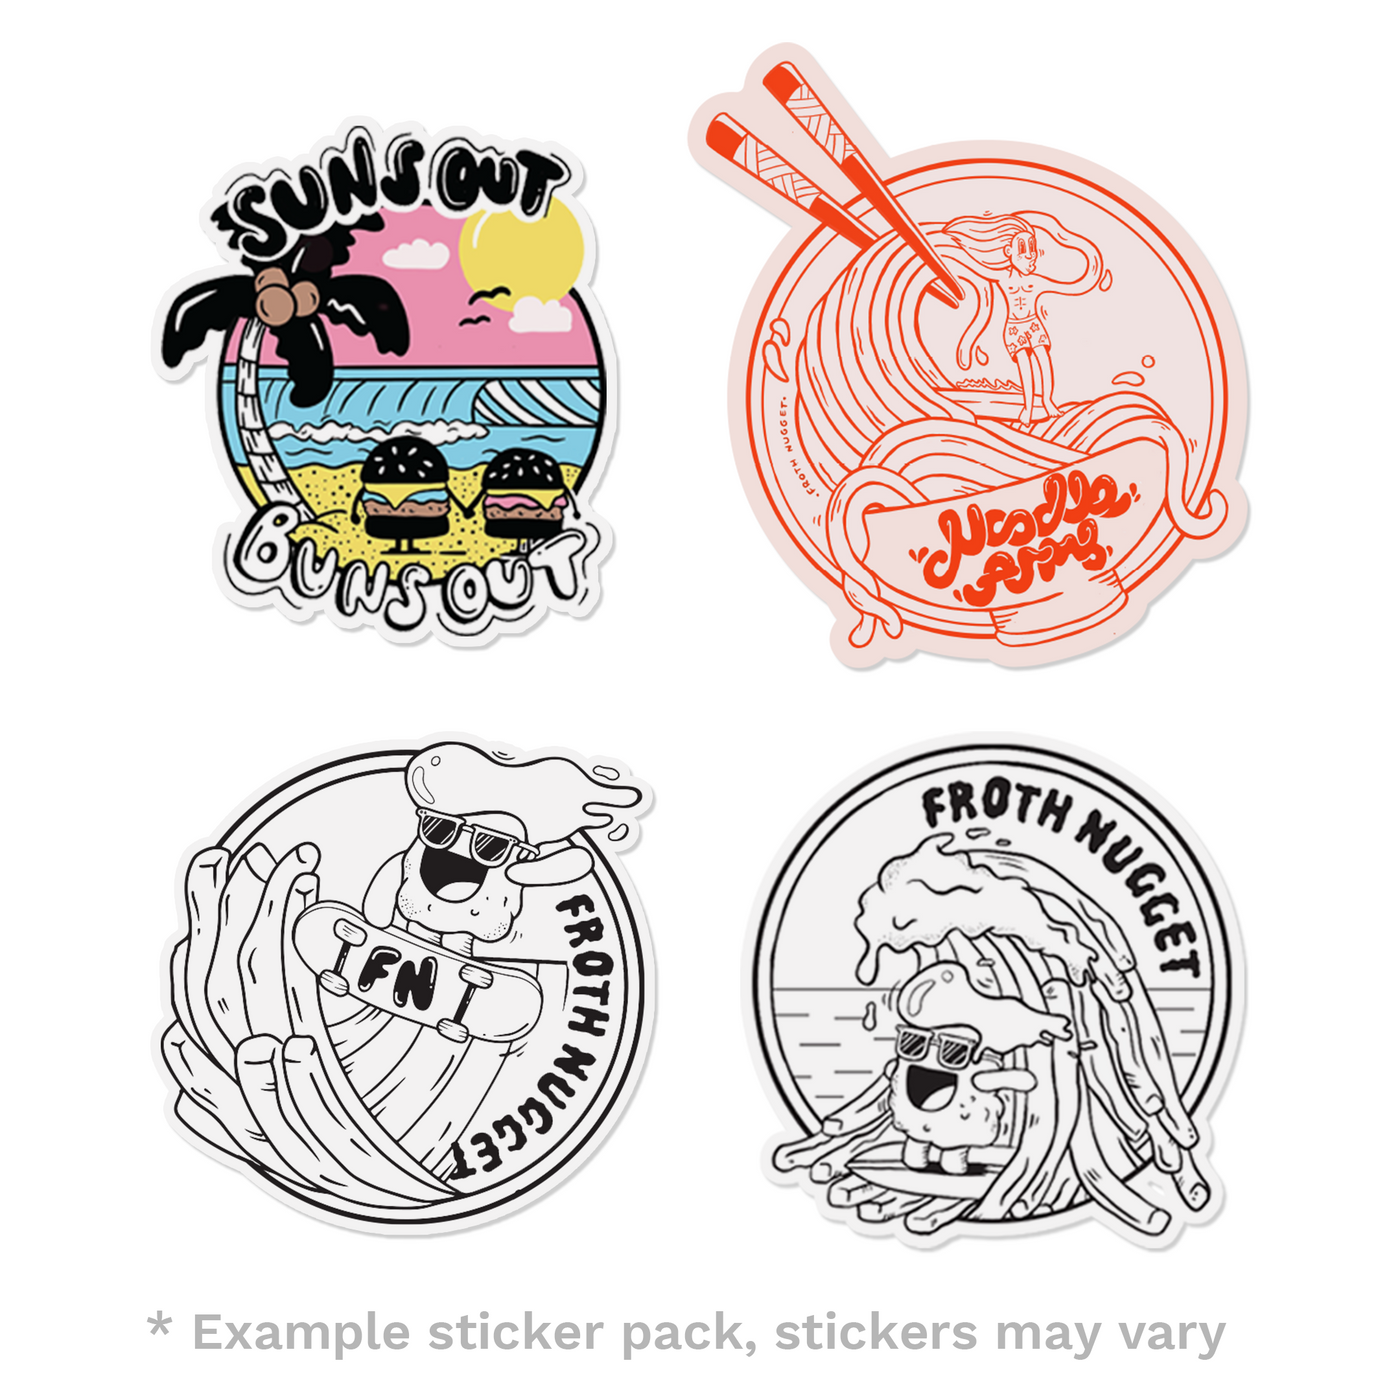 Mystery Froth Nugget Sticker Pack